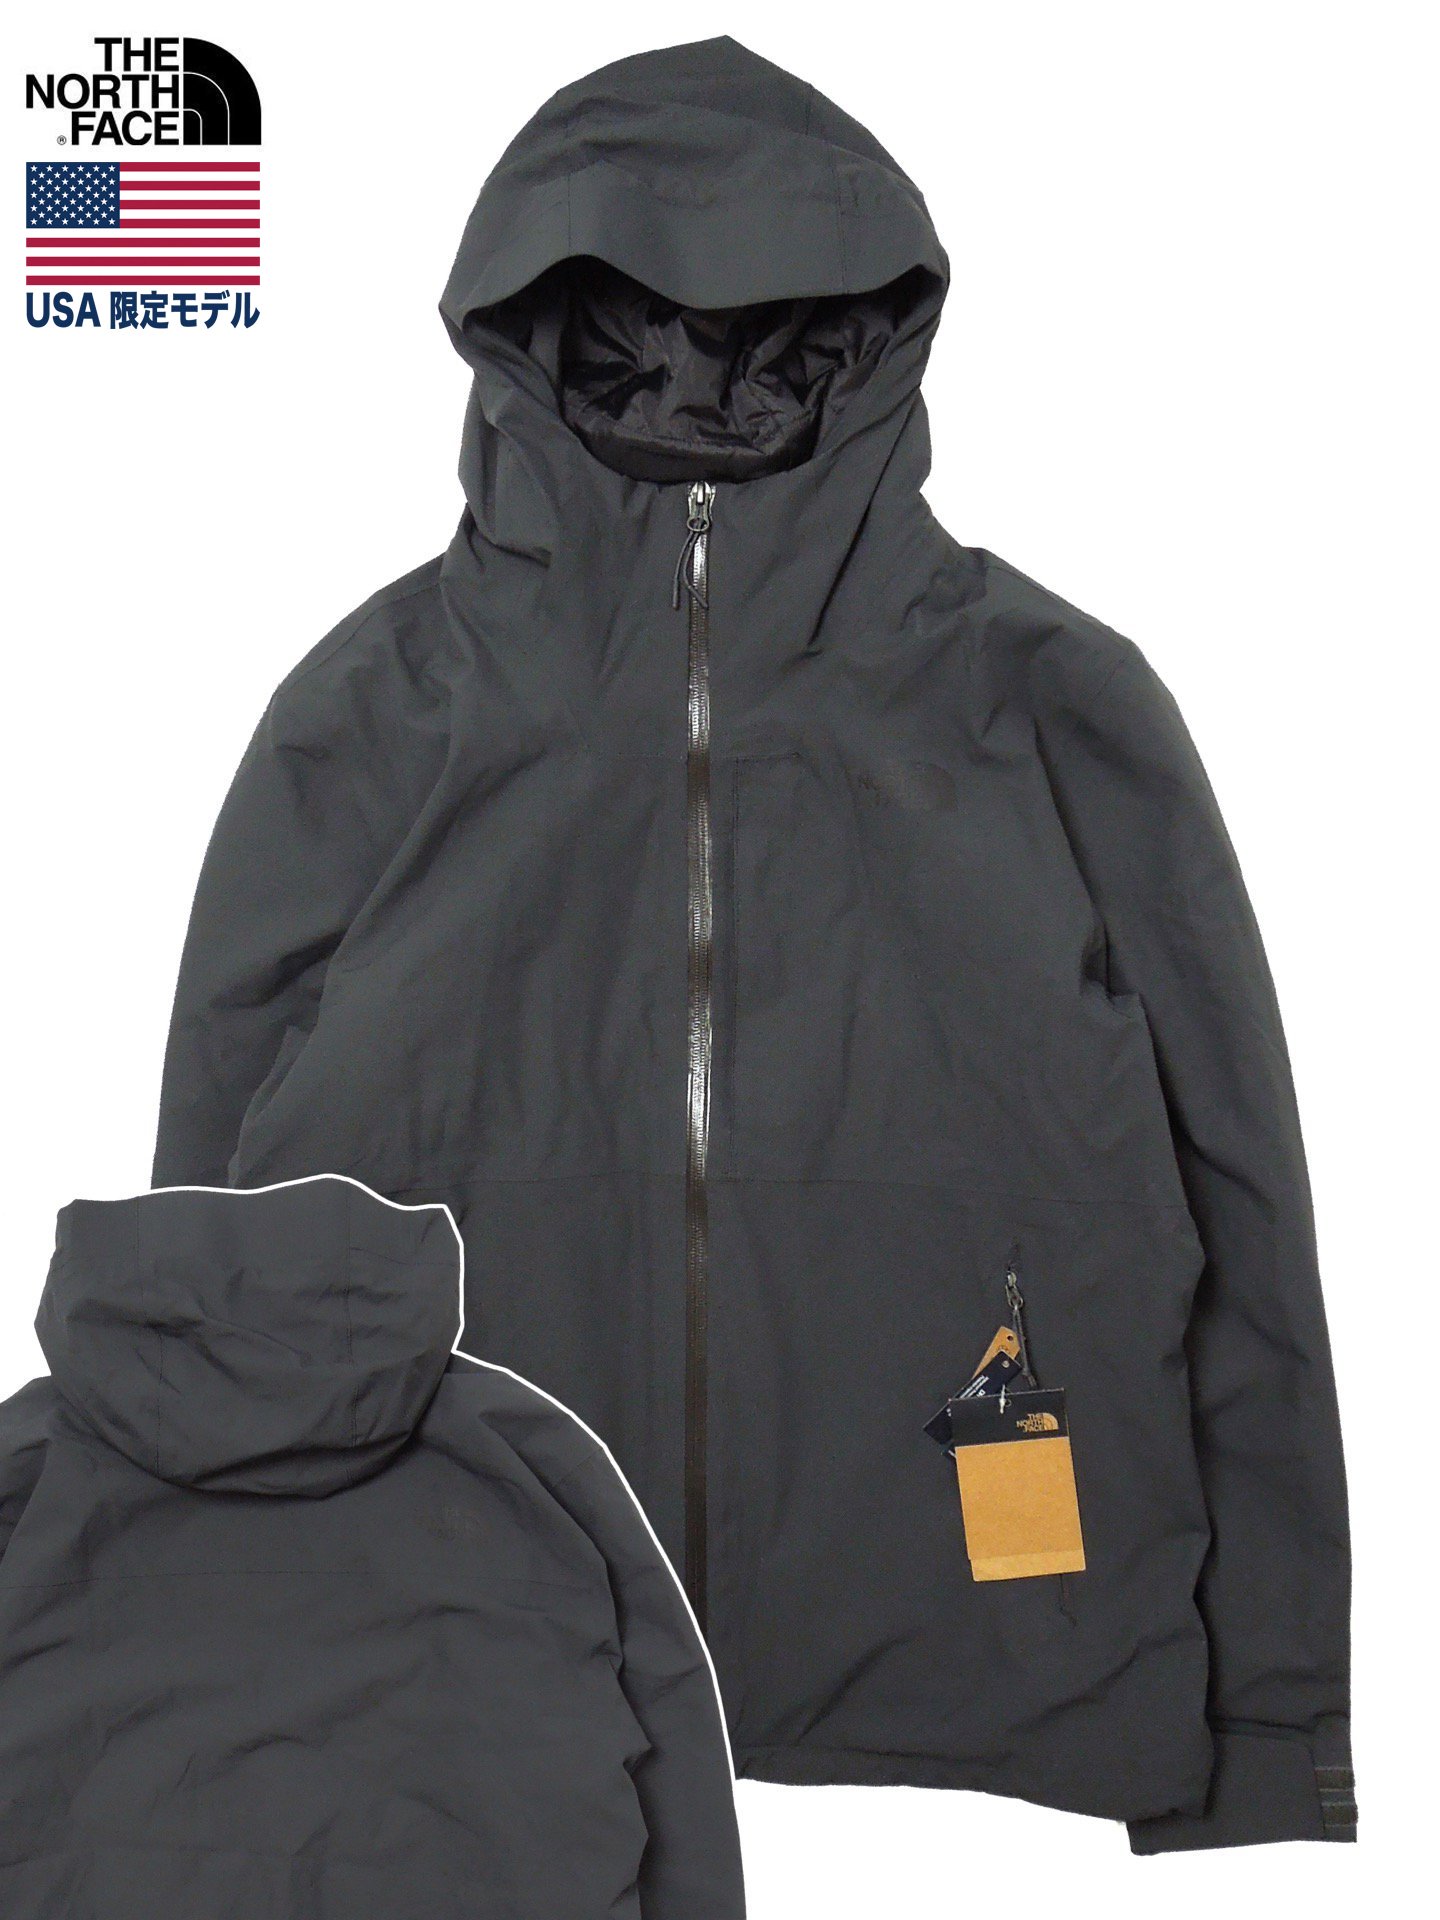 [THE NORTH FACE] INLUX INSULATED JACKET「US限定モデル」(GR) - FLASH POINT Web Shop